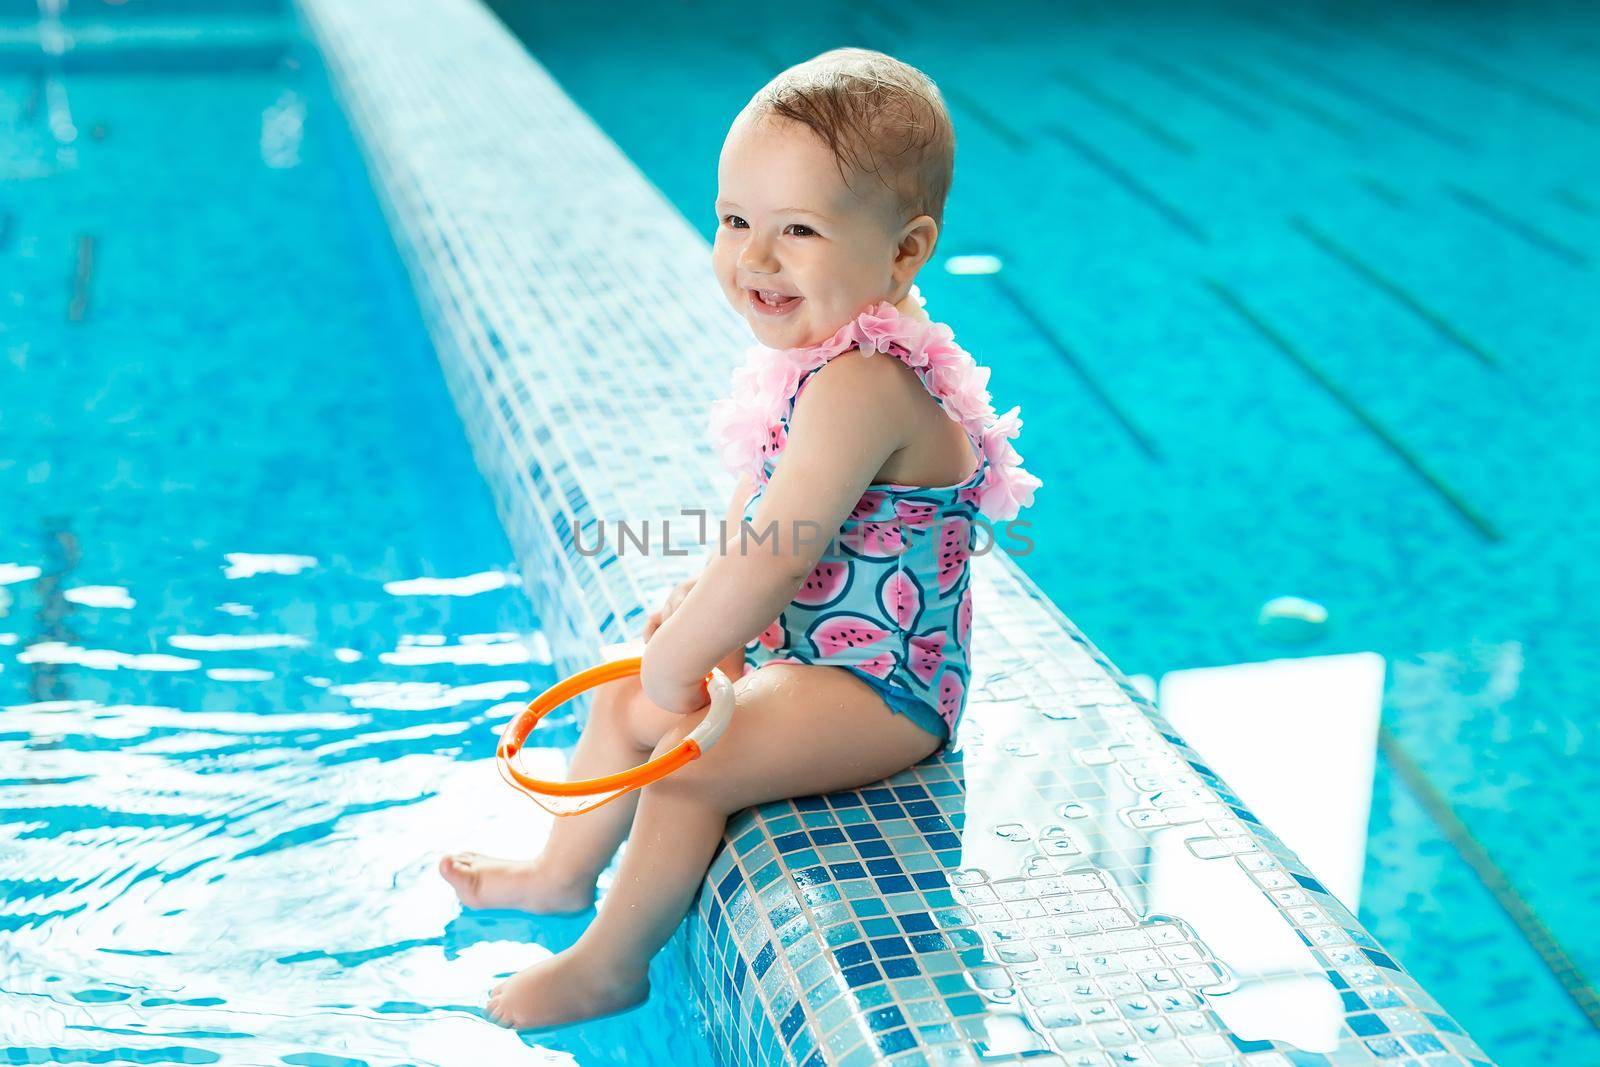 Little girl is laughing in the pool at a swimming lesson by StudioPeace